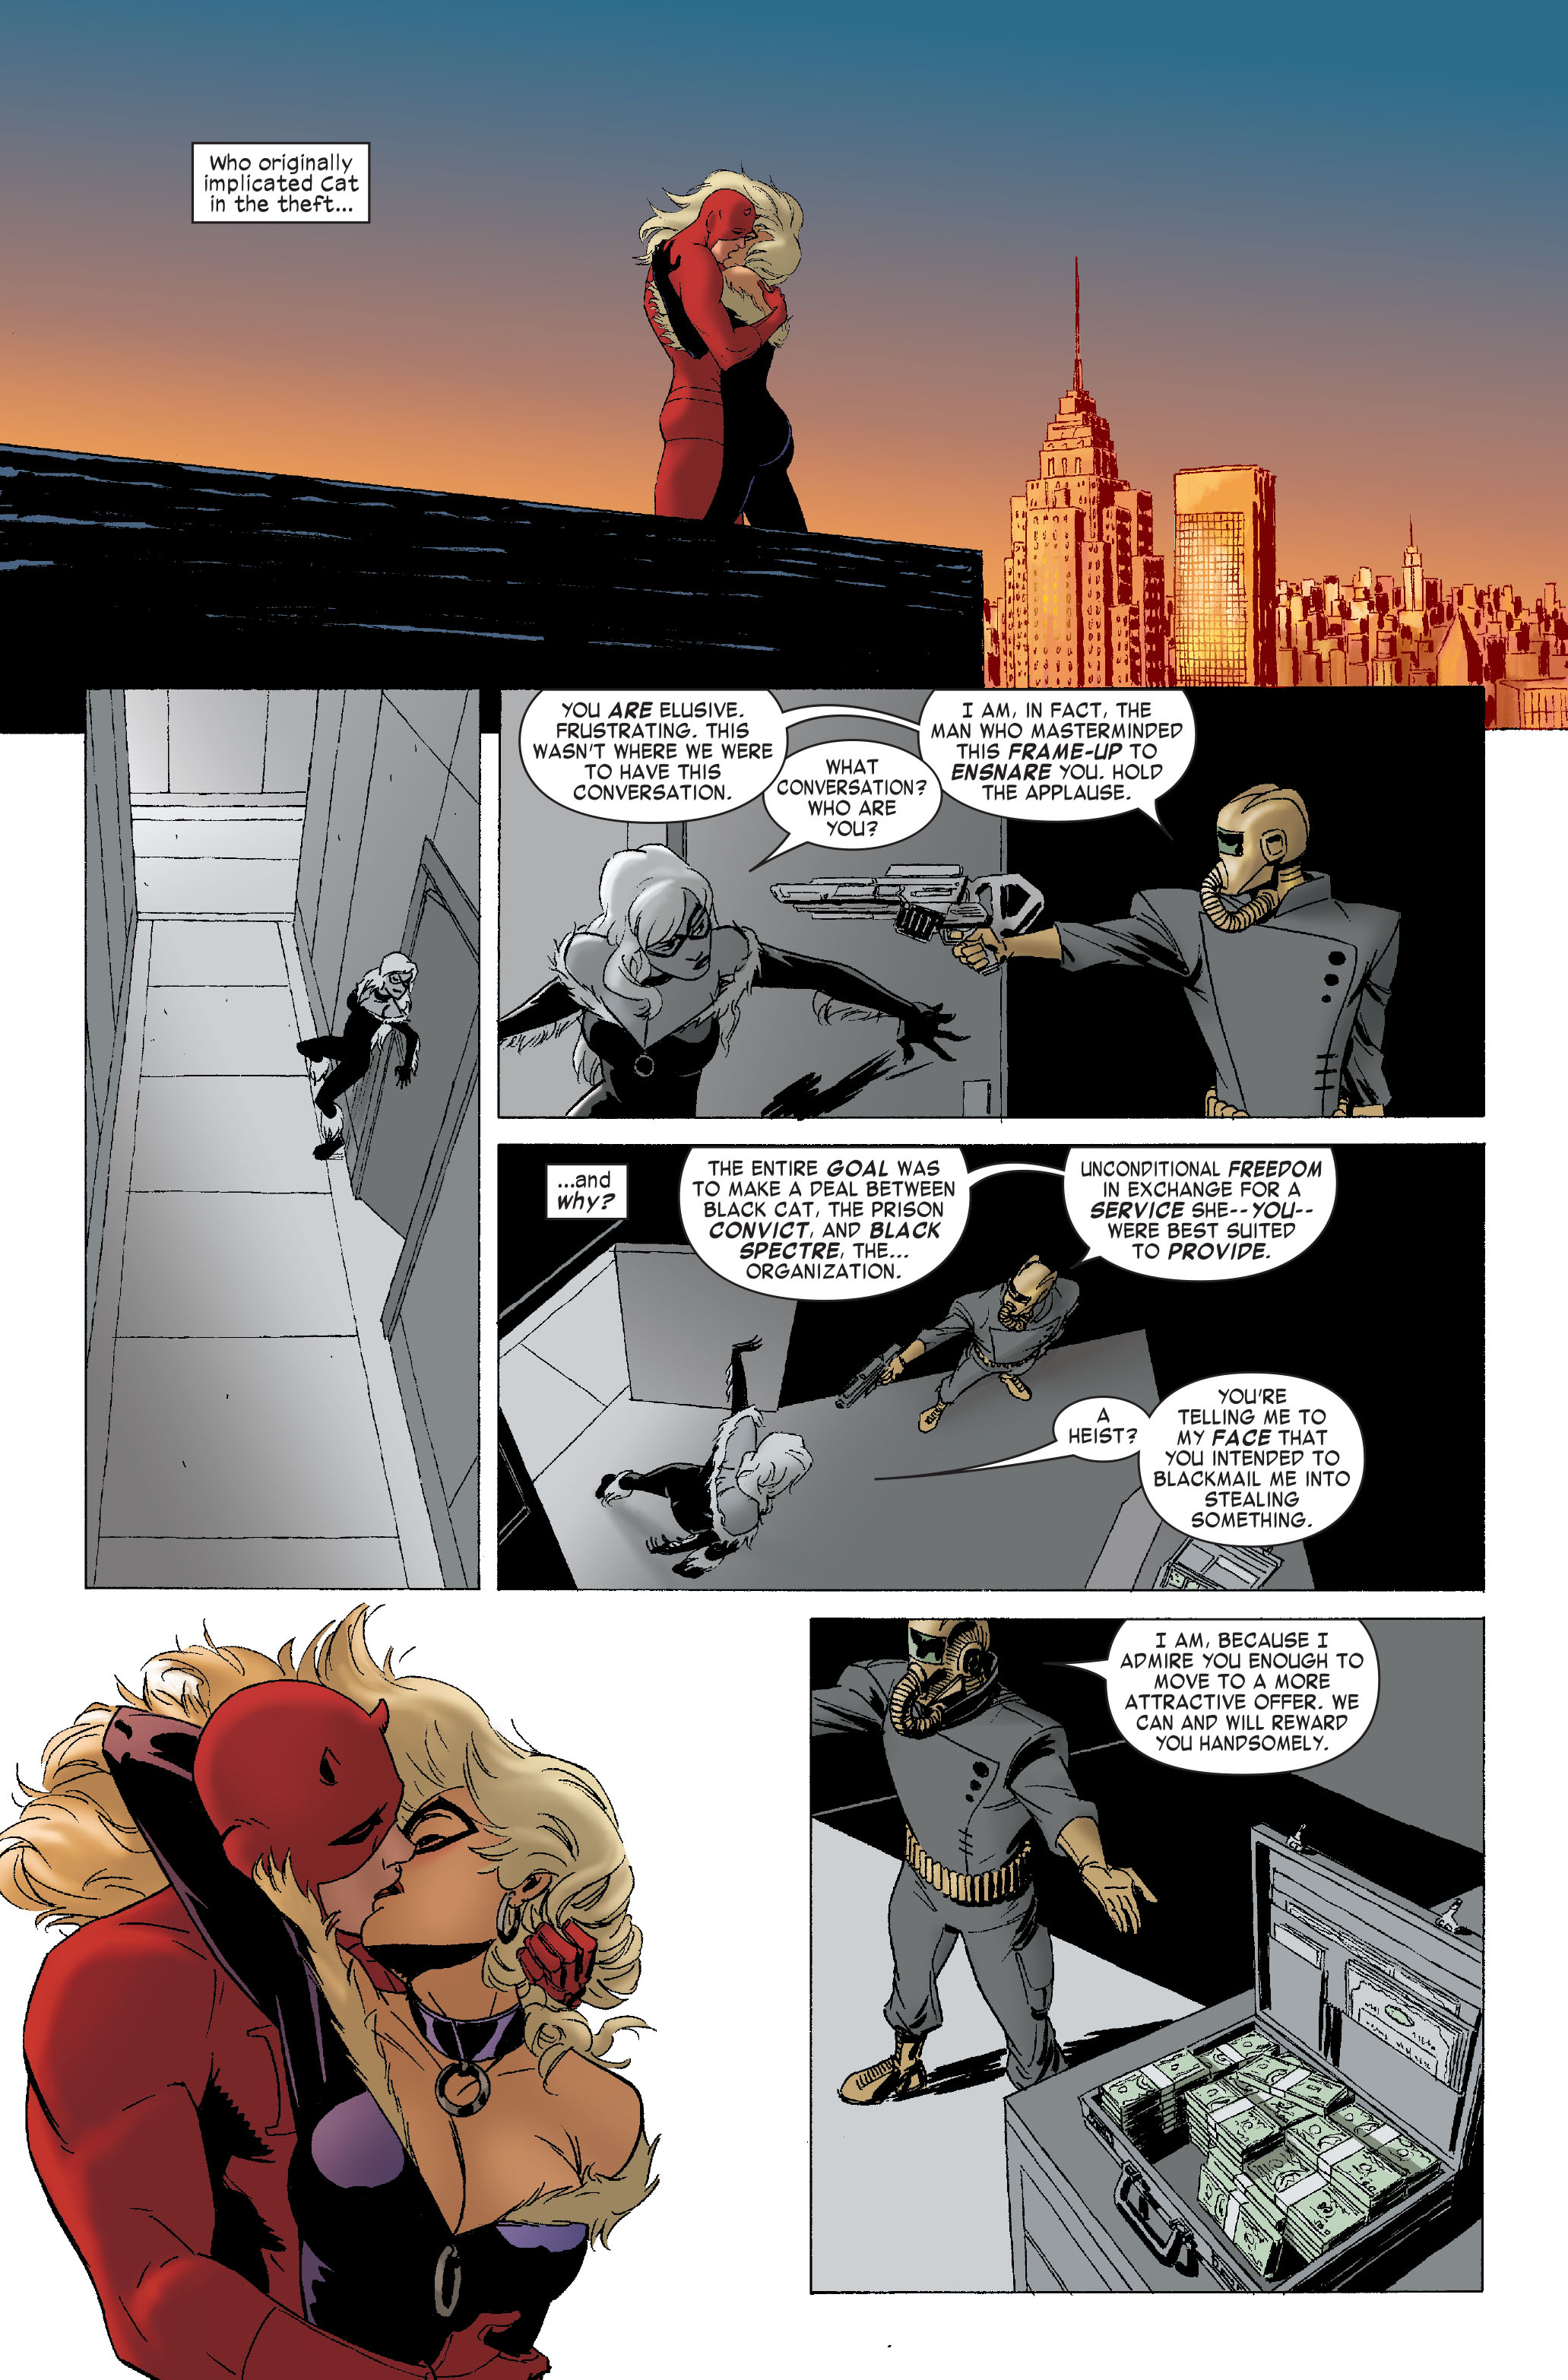 Daredevil 2011 Issue 8 | Read Daredevil 2011 Issue 8 comic online in high  quality. Read Full Comic online for free - Read comics online in high  quality .|viewcomiconline.com